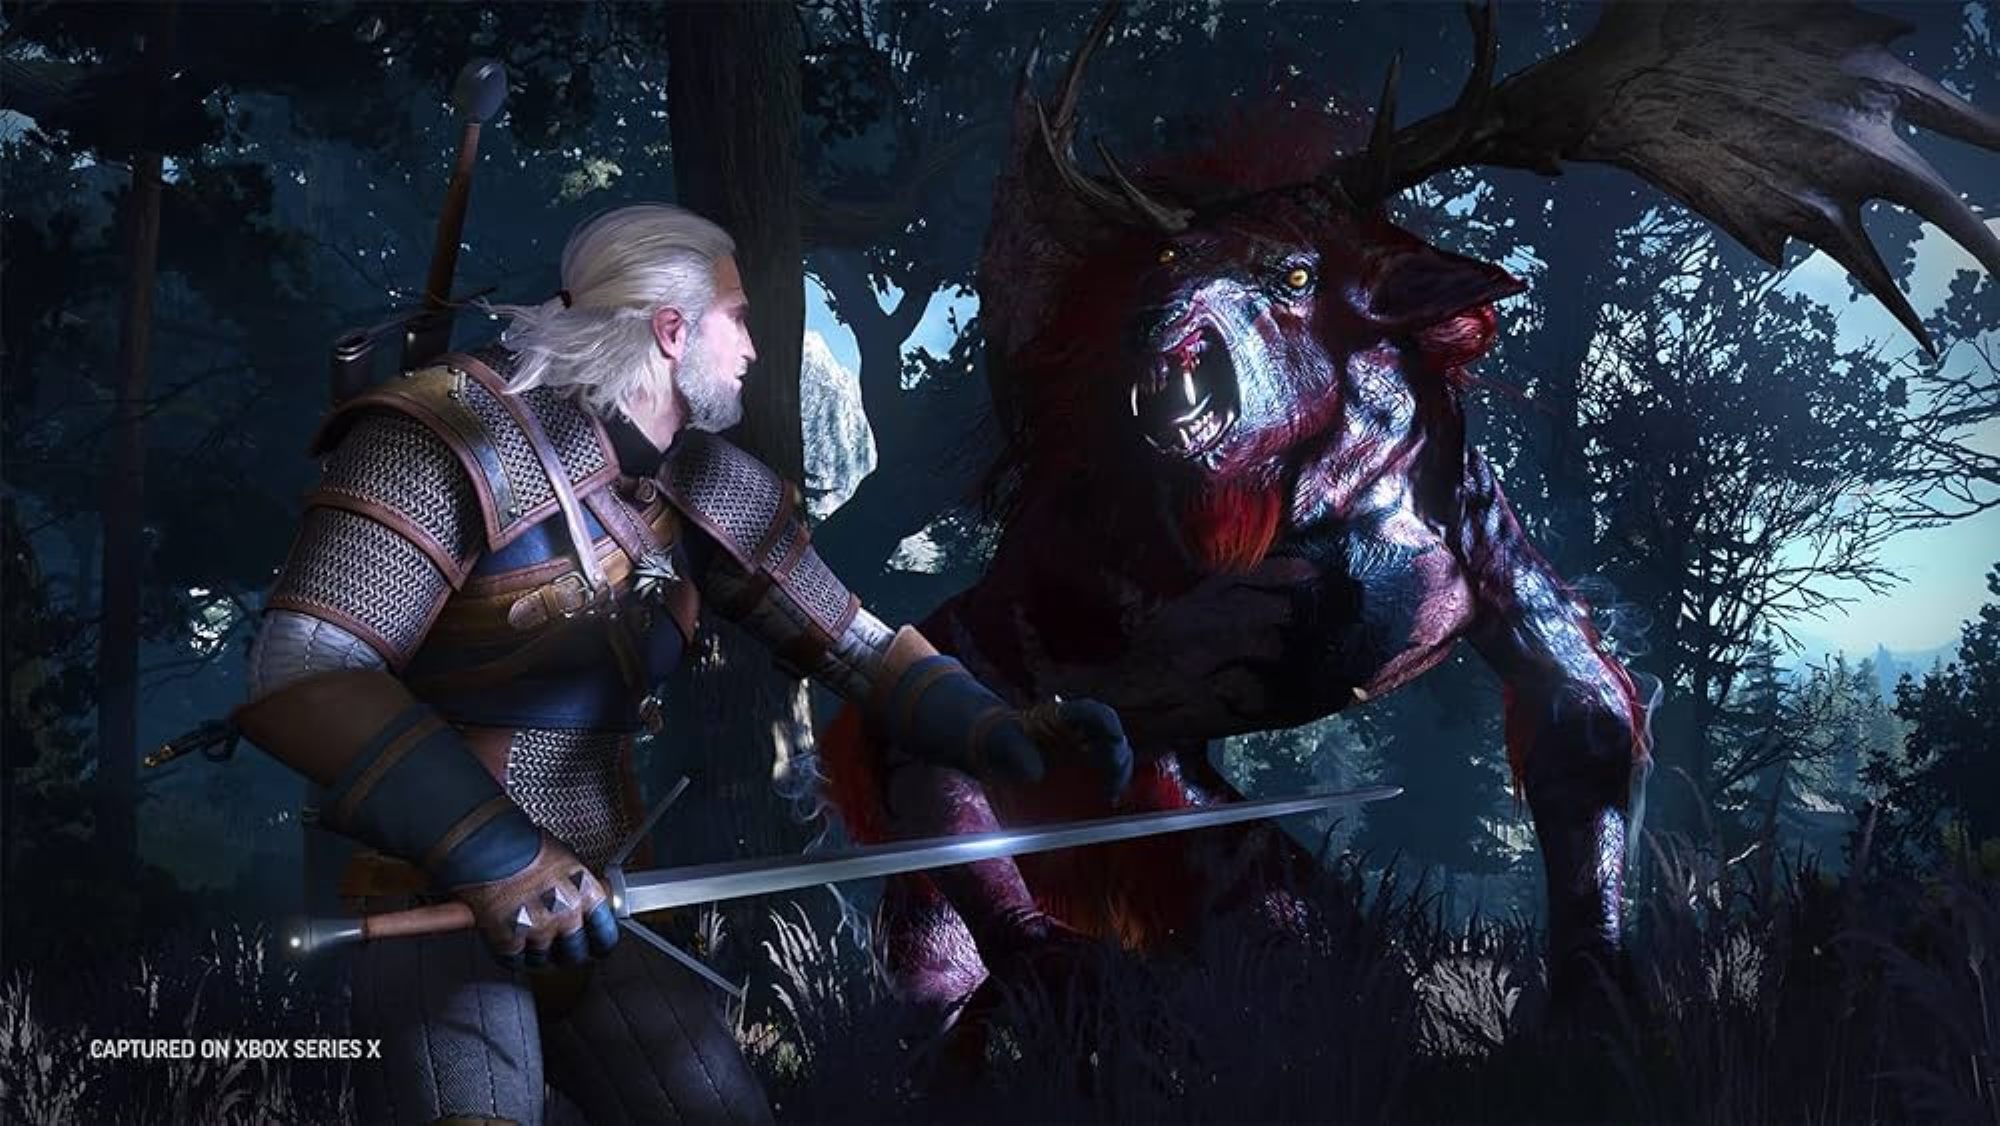 WRPGs Like The Witcher 3 Allow Players To Play The Game At Their Own Pace